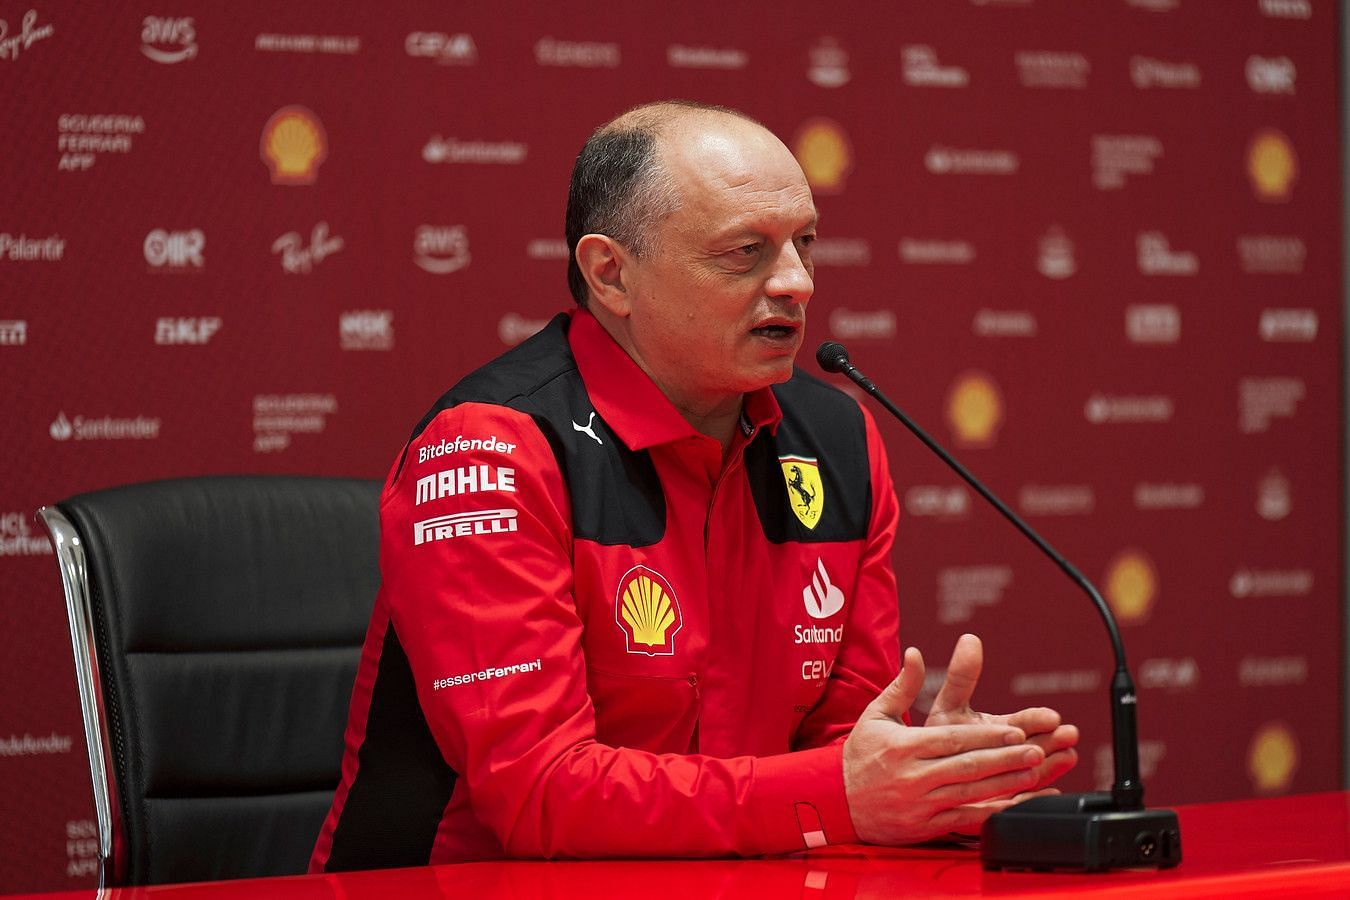 Ferrari boss Fred Vasseur subtly warns of impending changes to Scuderia  strategy unit: "We'll make some small adjustments"